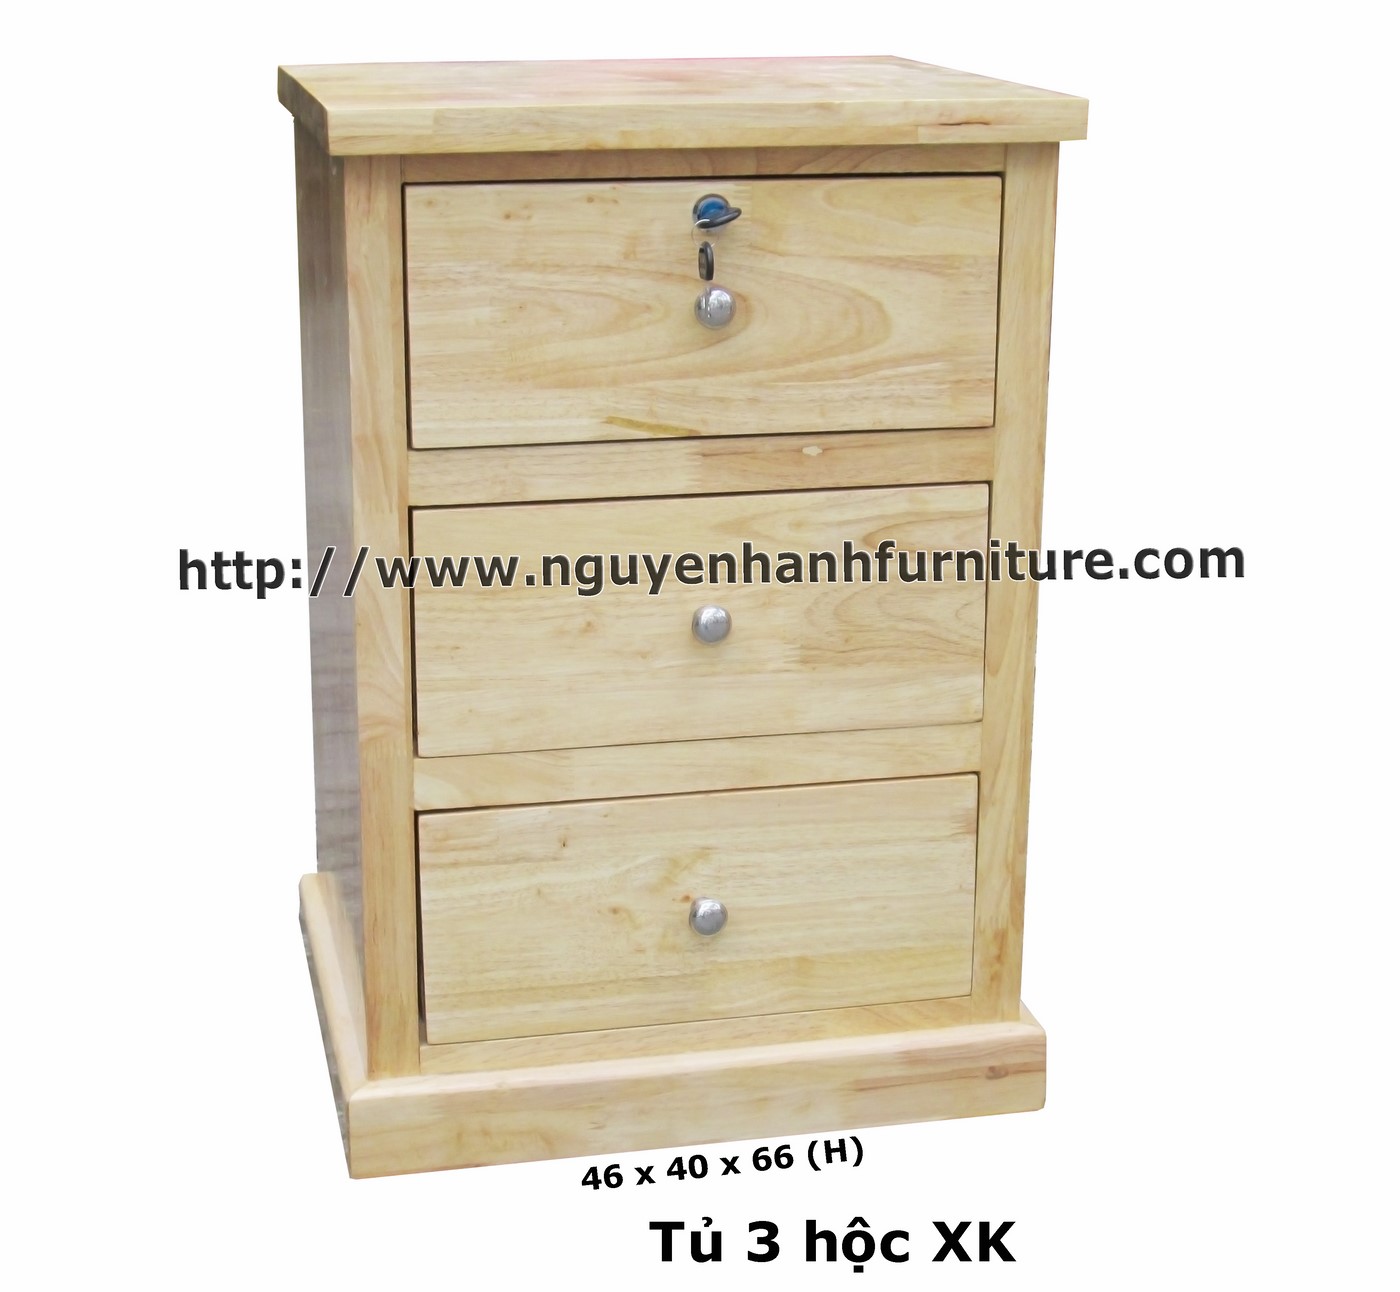 Name product: Headboard cabinet (3 drawers) Natural - Dimensions: 46 x 40 x 66 (H) - Description: Wood natural rubber